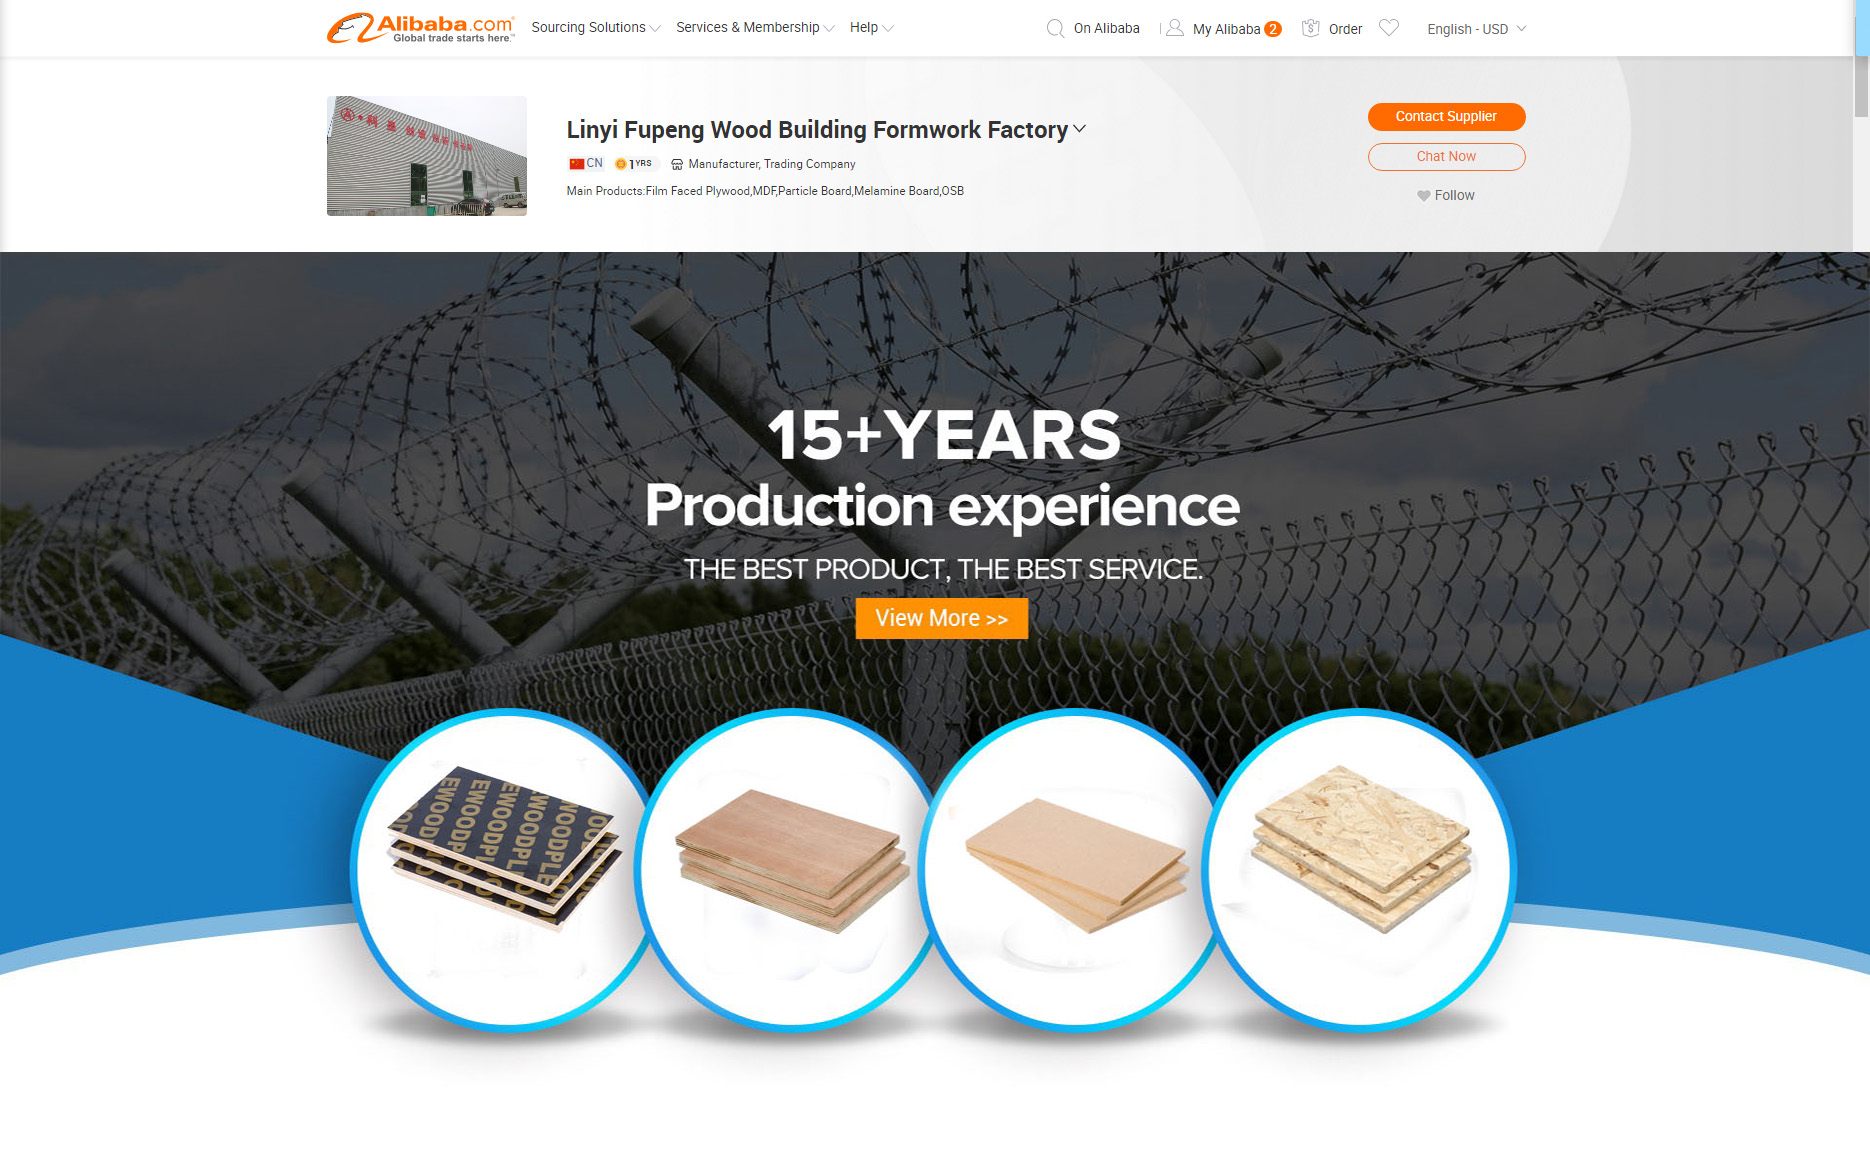 FUPENG WOOD ONLINE SHOPING SITE